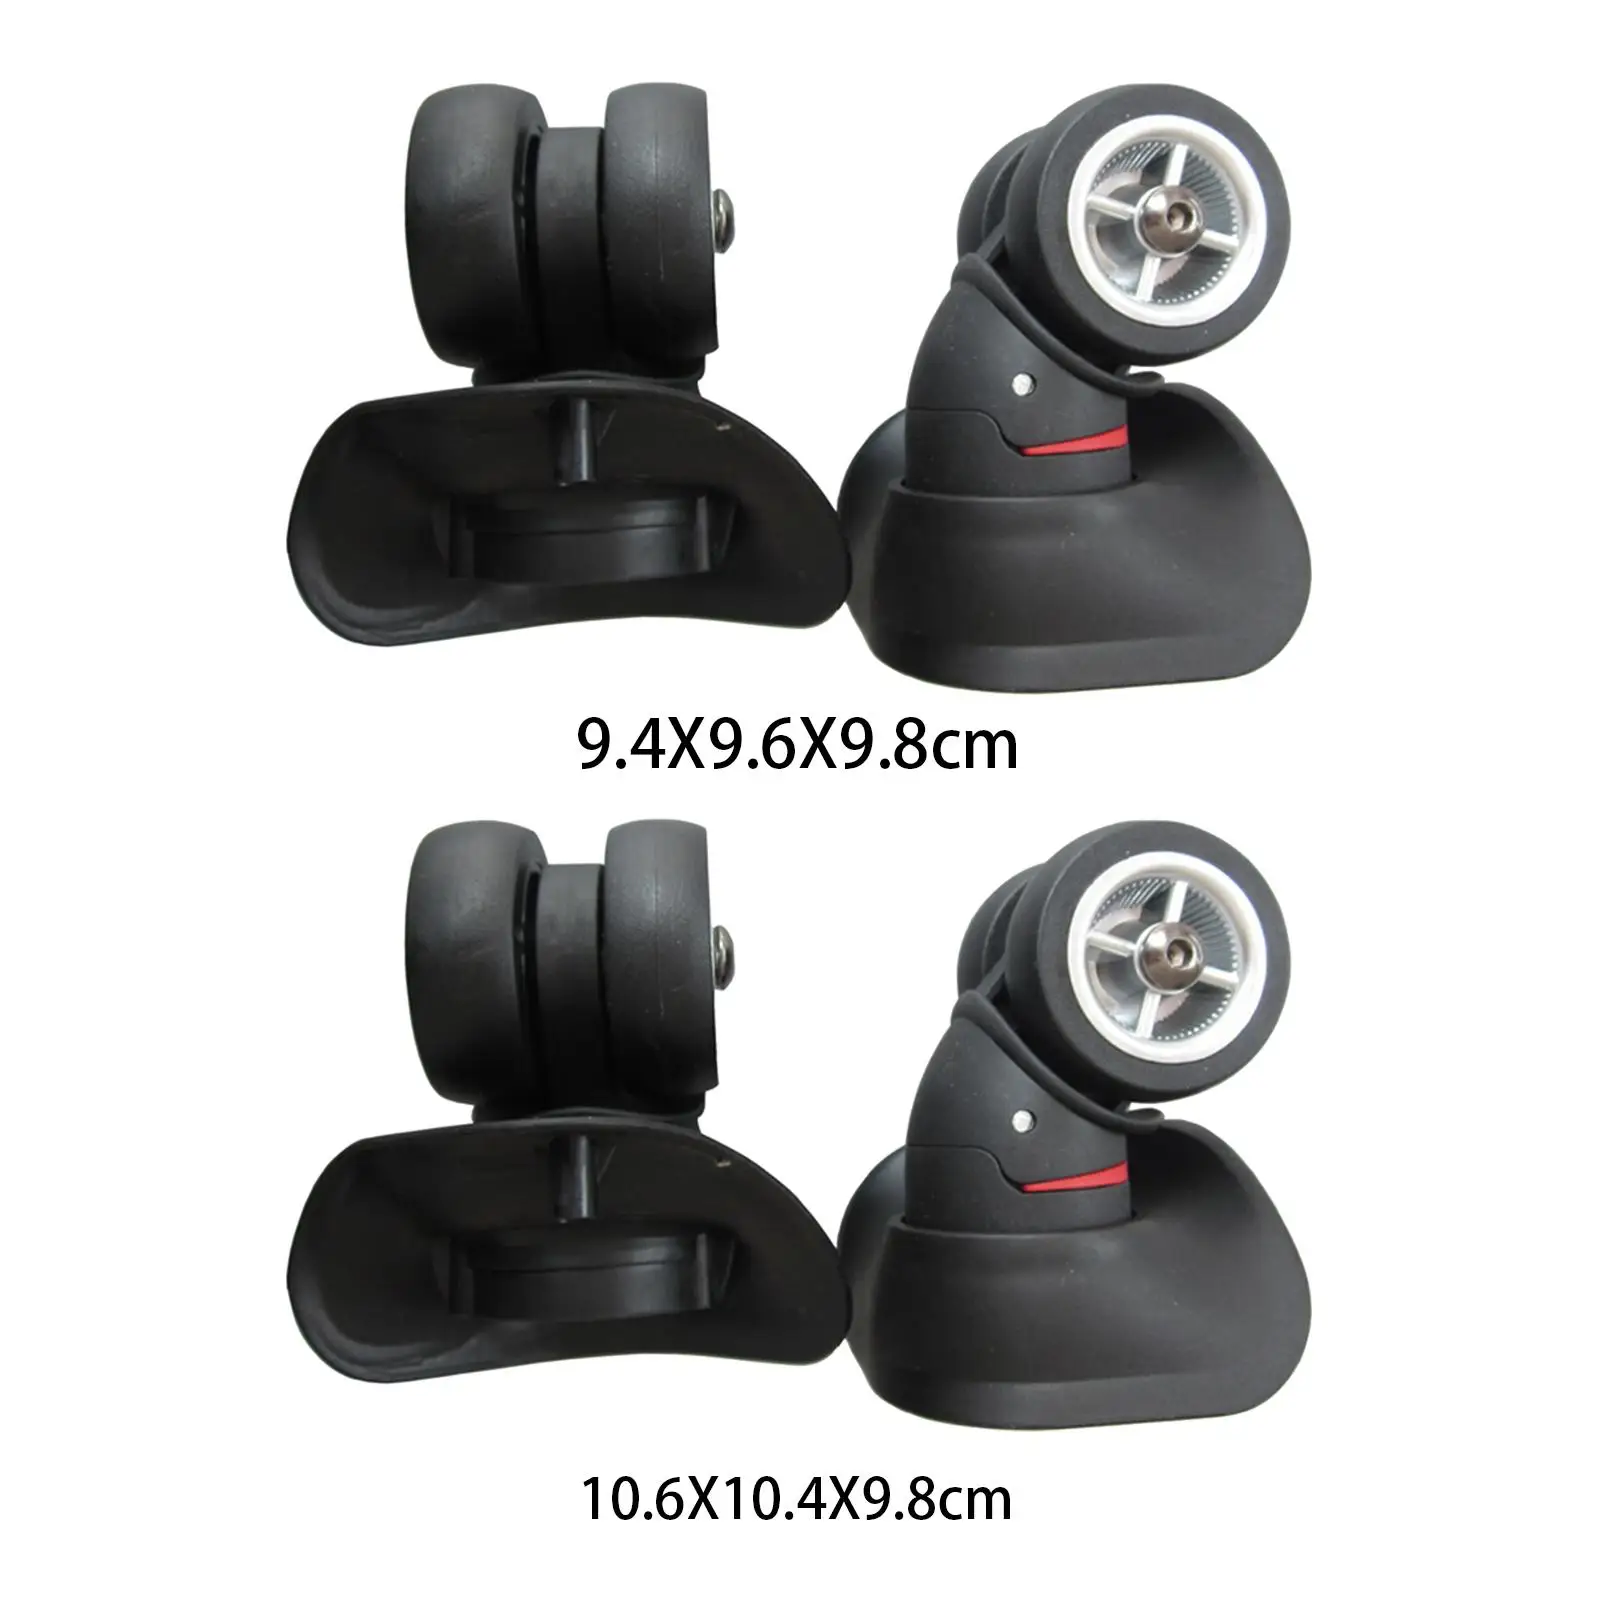 A08 Luggage Wheel Replacement Universal Swivel Casters Travel Suitcase Wheels Luggage Mute Wheel for Luggage Box Travelling Bag